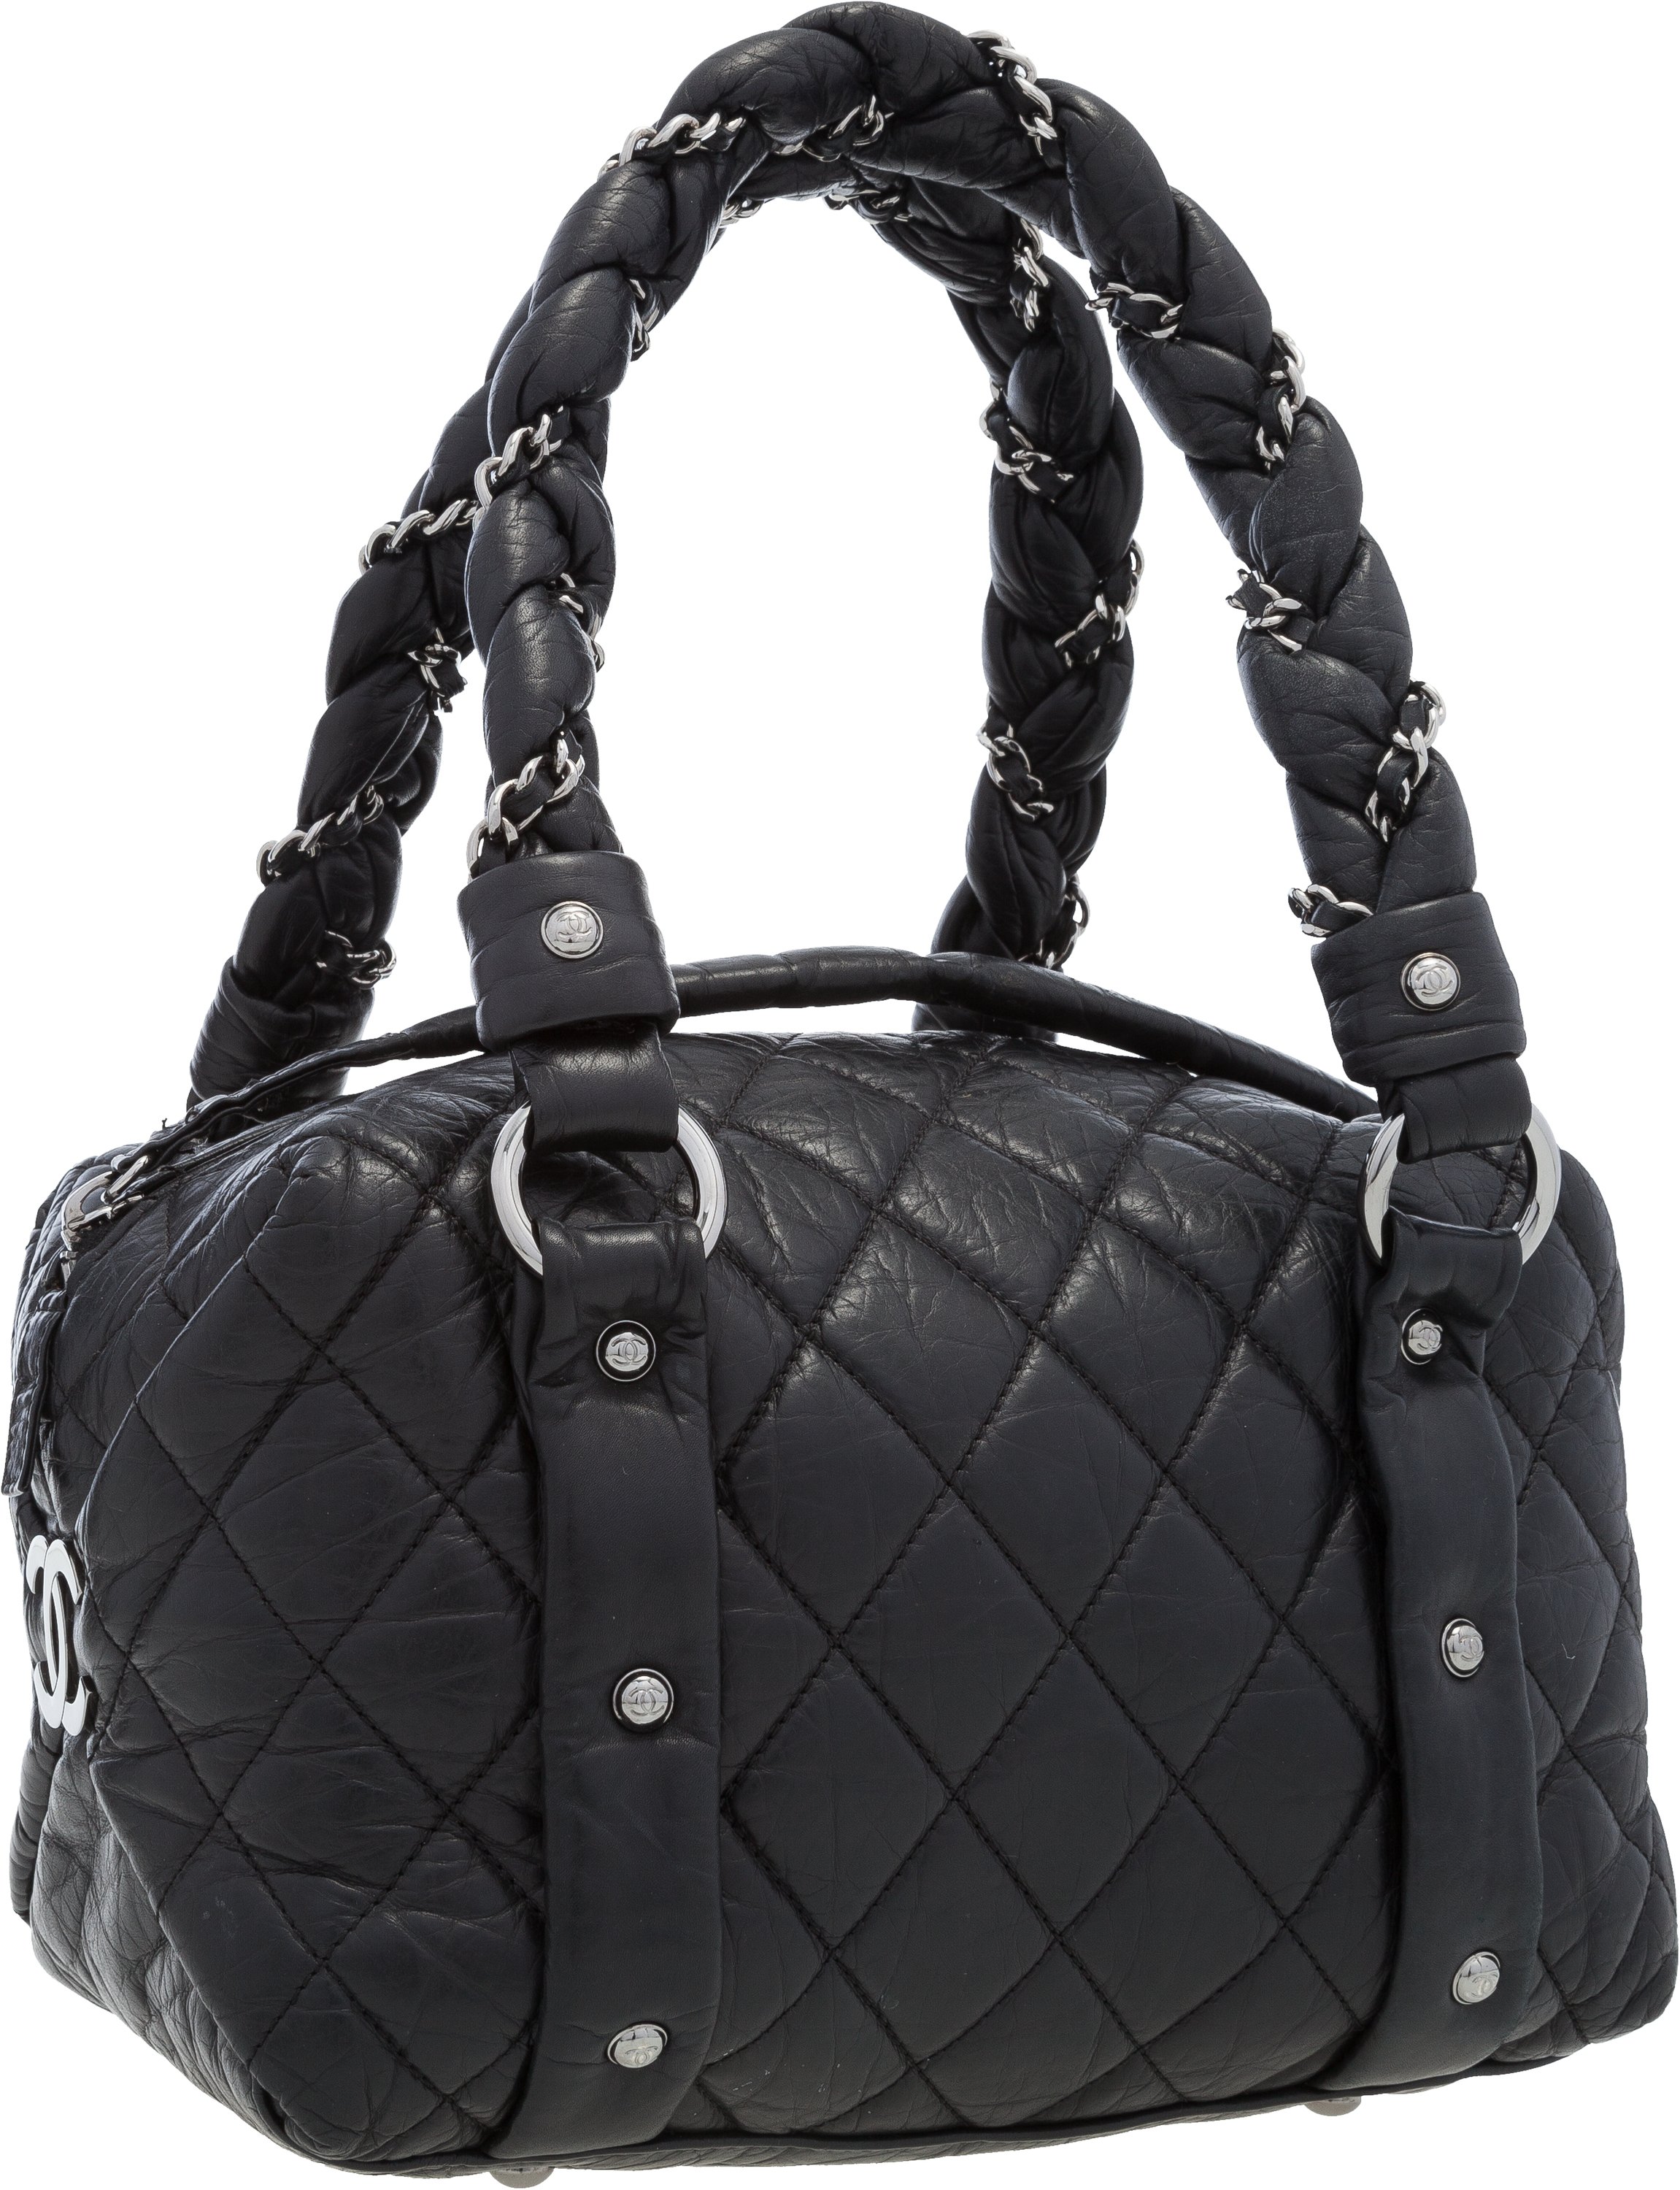 Grand shopping leather tote Chanel Black in Leather - 36989602